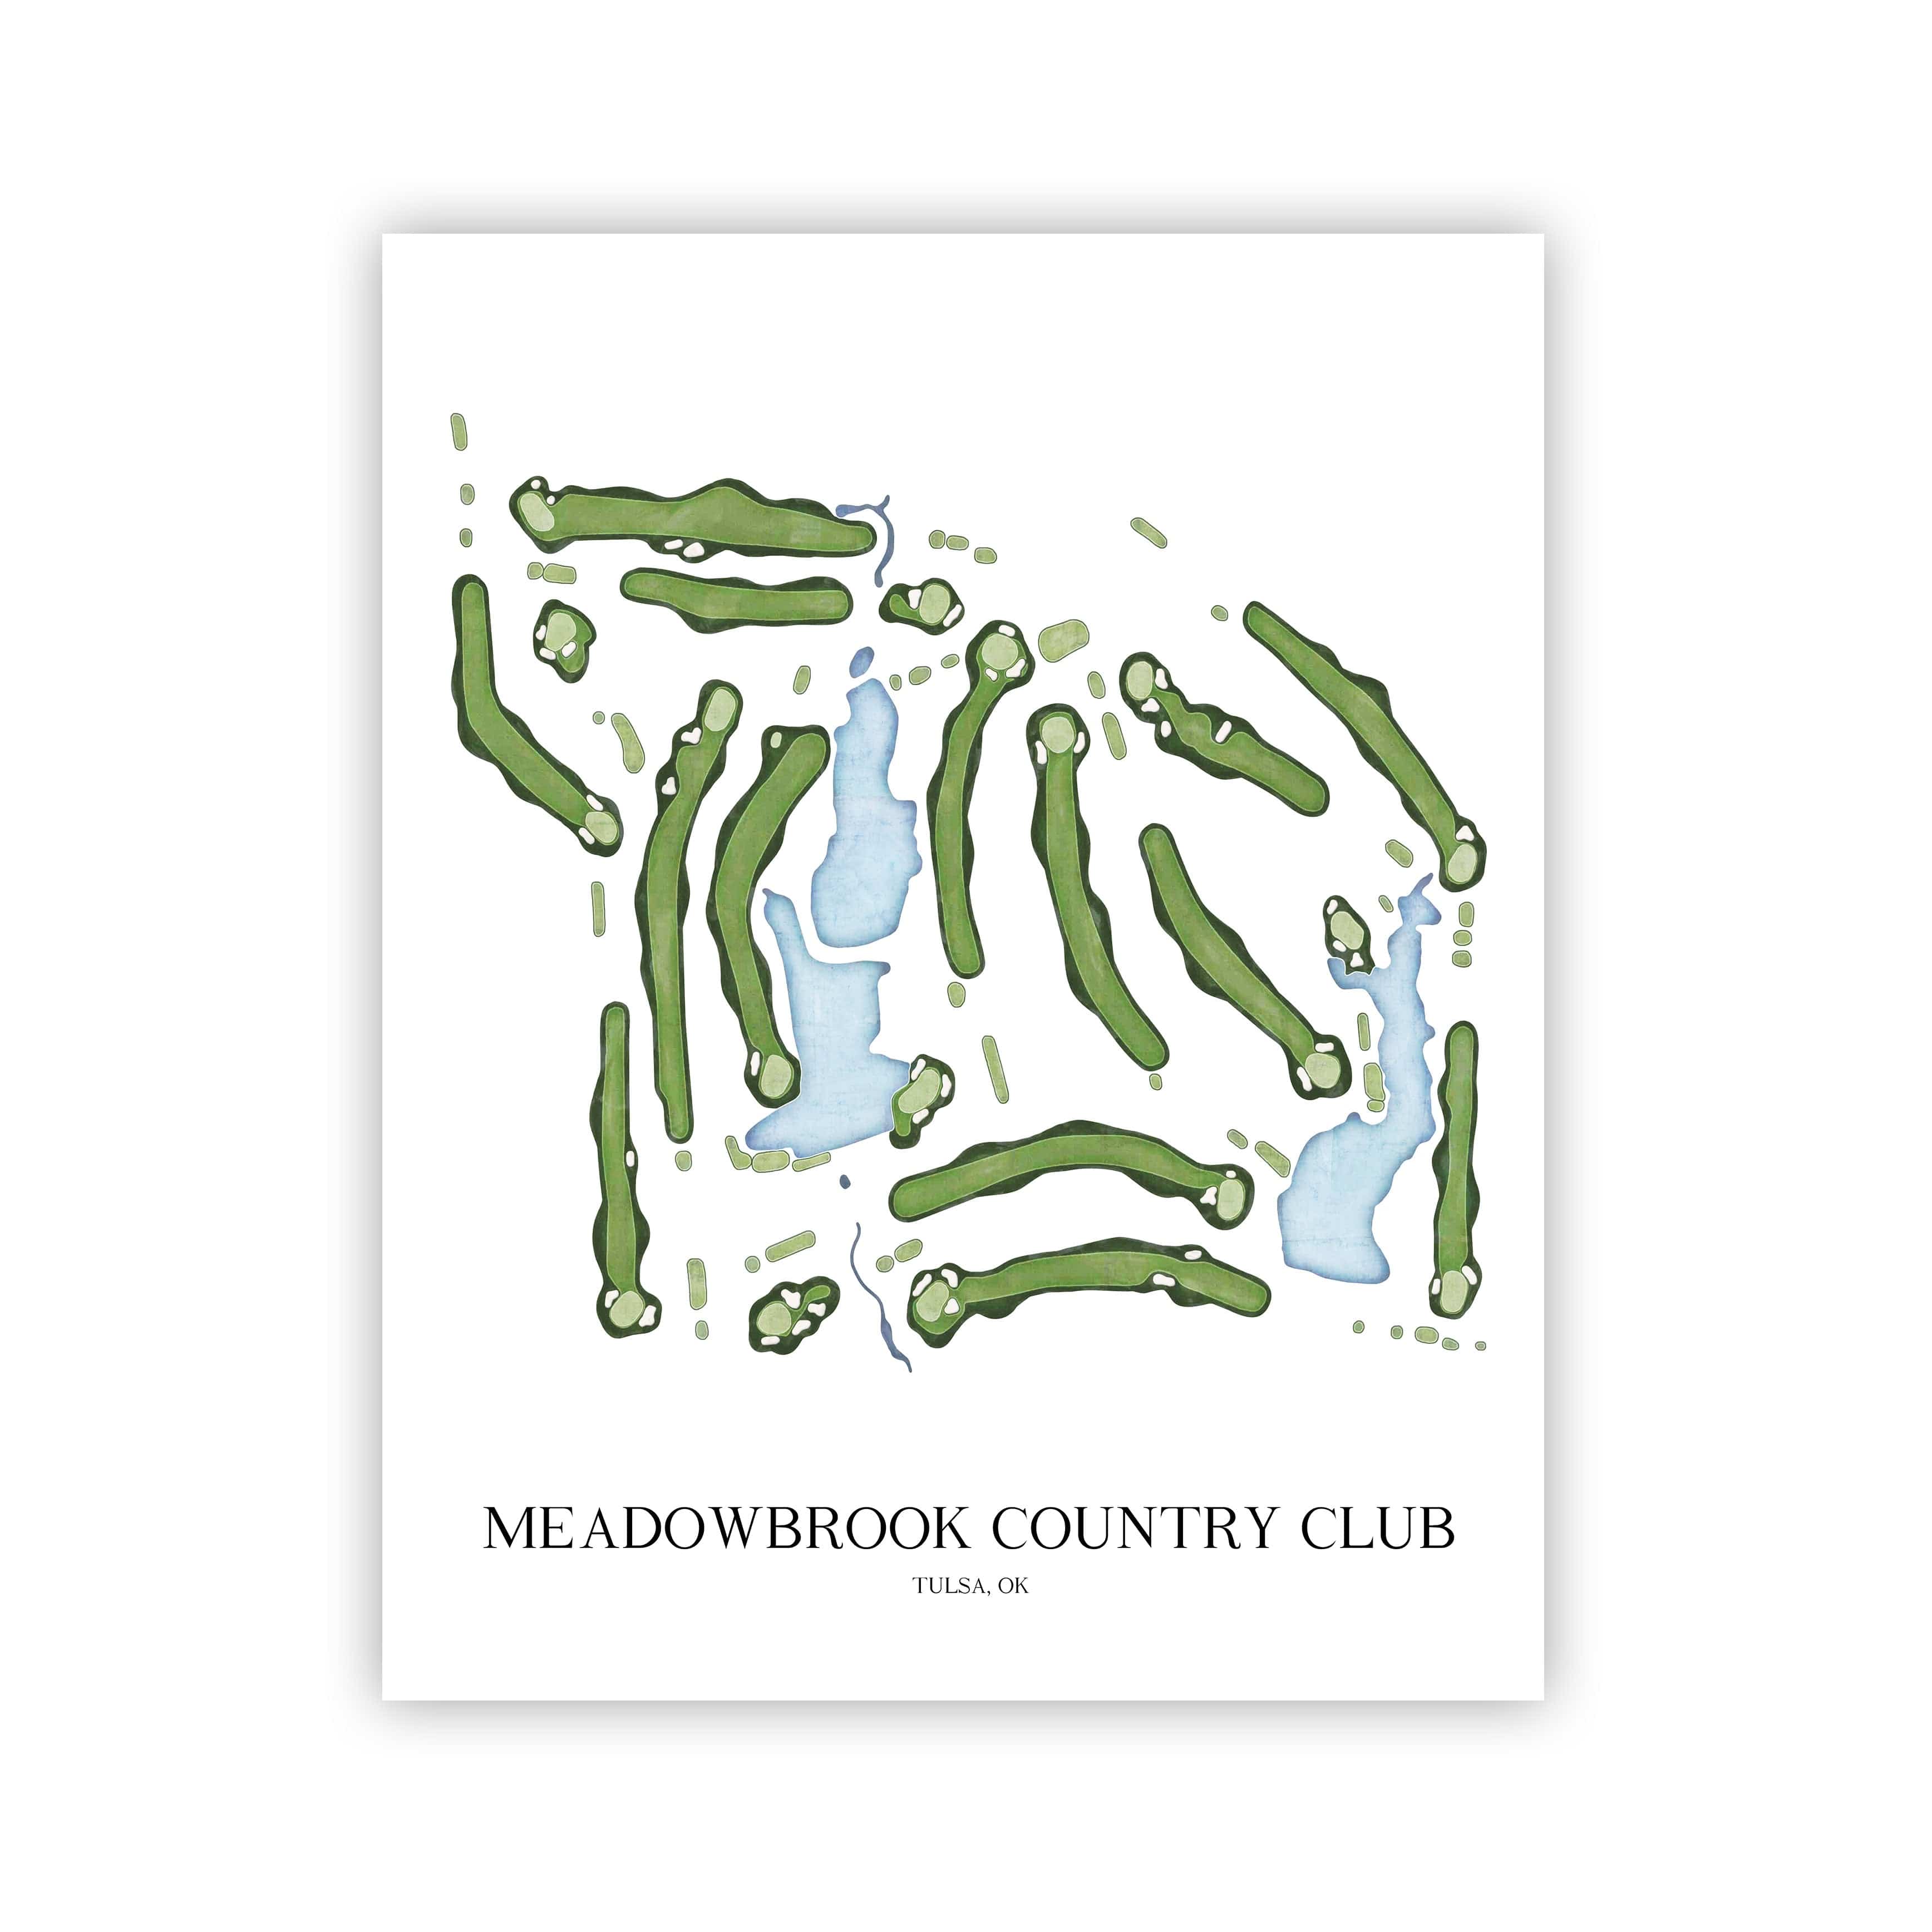 The 19th Hole Golf Shop - Golf Course Prints -  Meadowbrook Country Club Golf Course Map